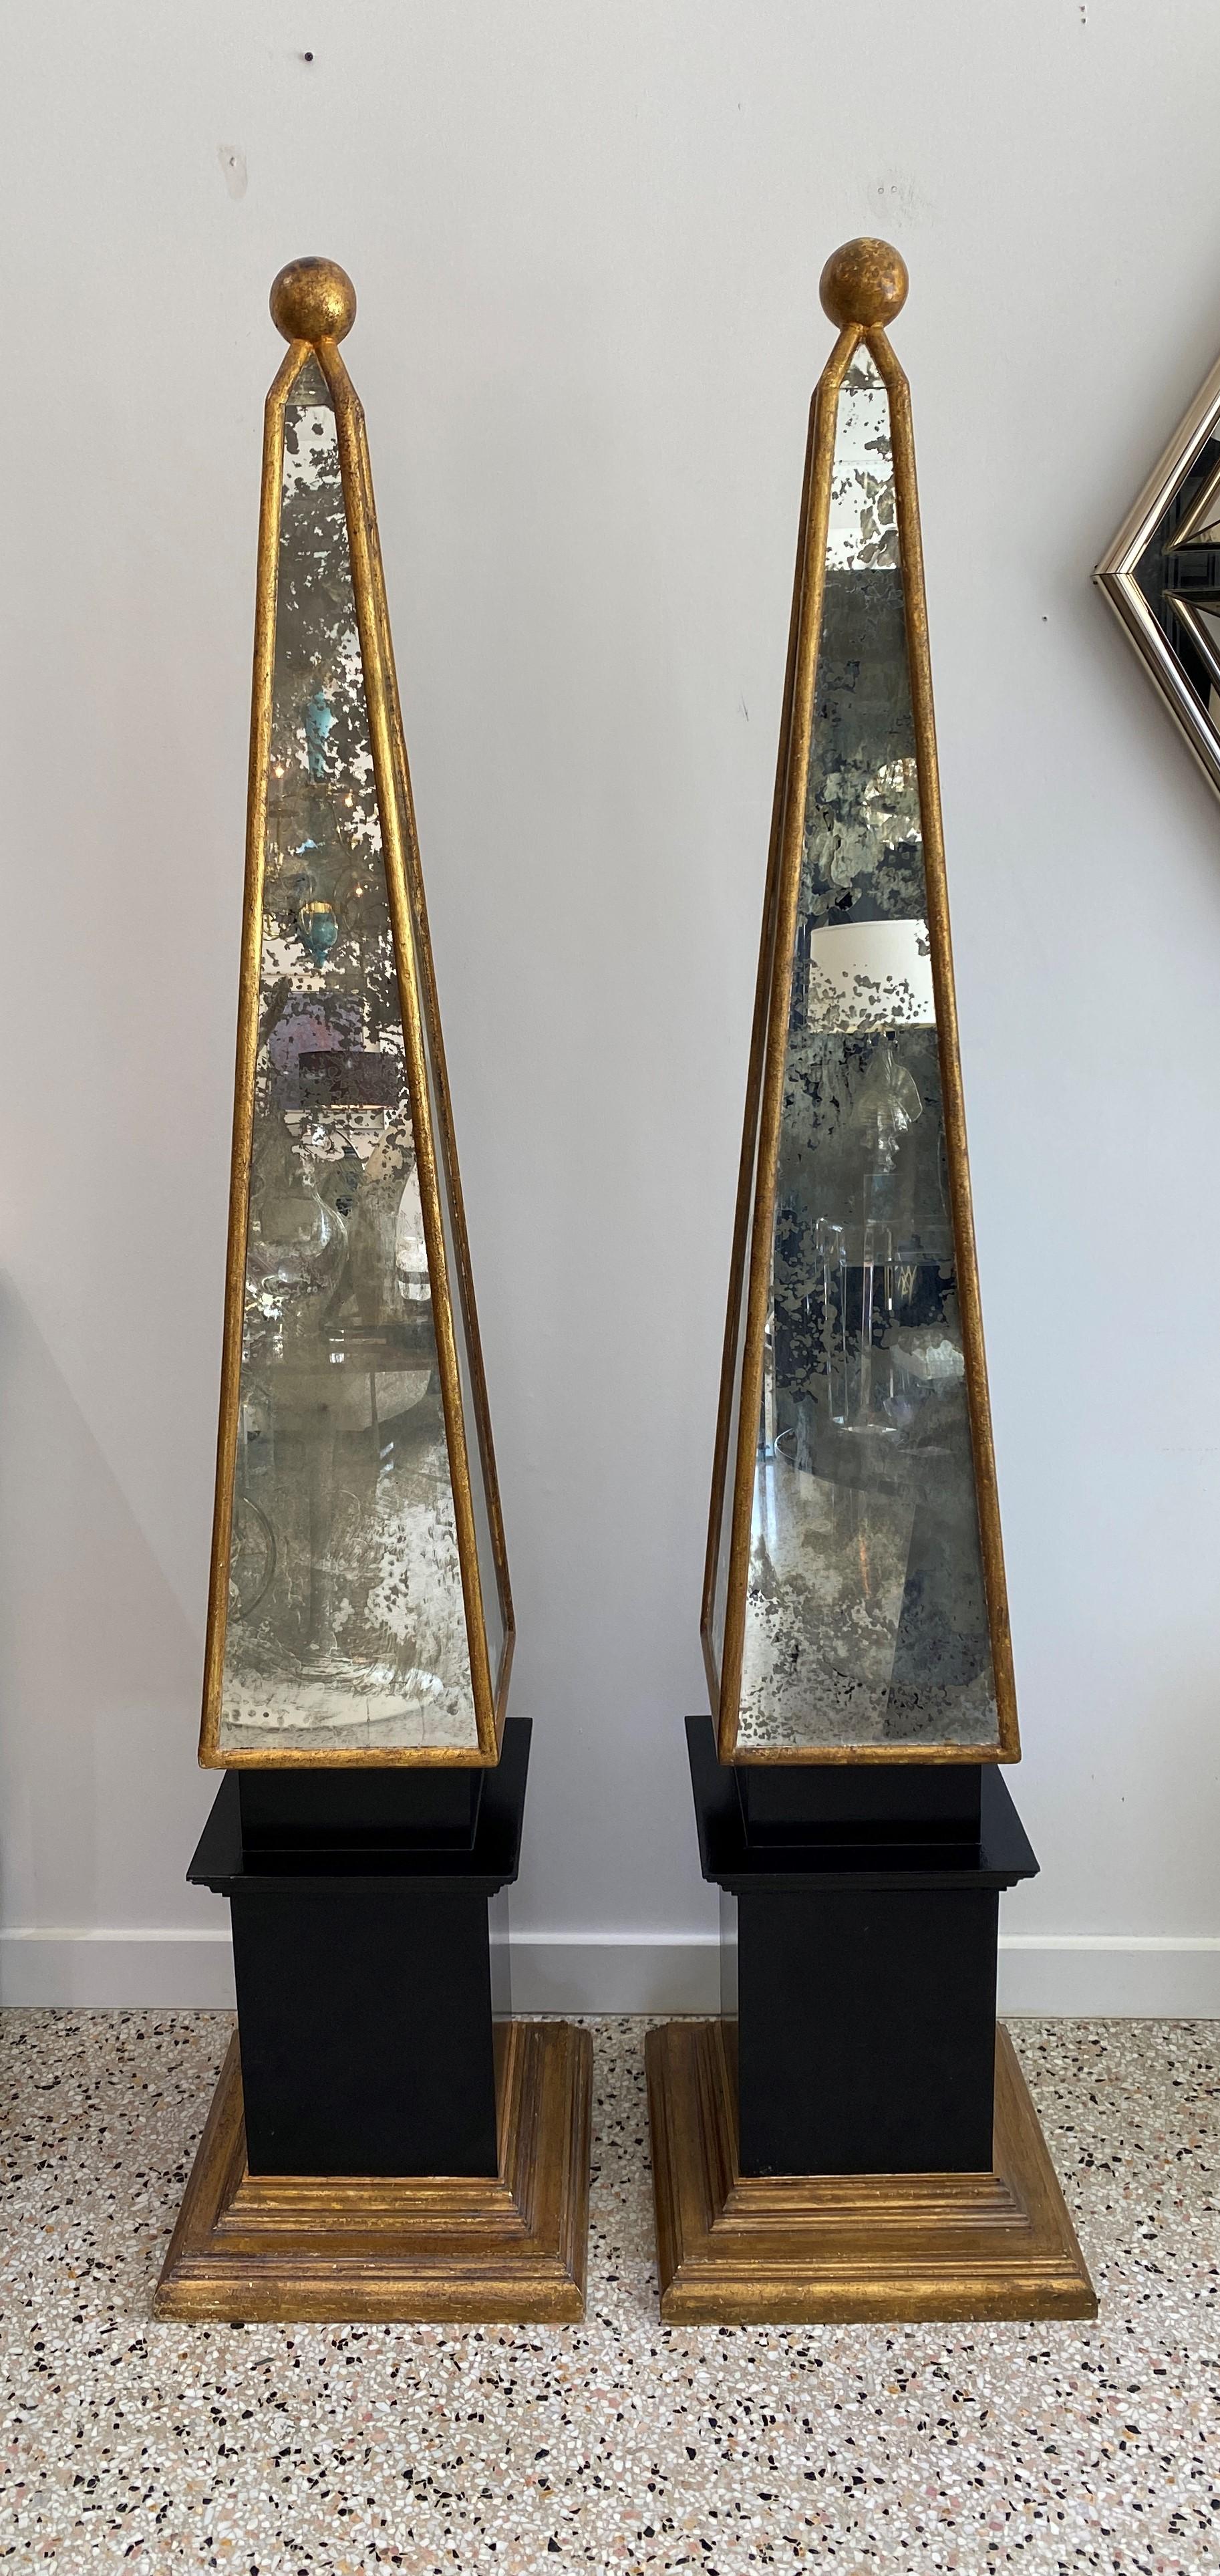 This large scale pair of 1930s Italian obelisk will make a definite statement with their classic form and use of antiqued mirror and Florentine gold finish.